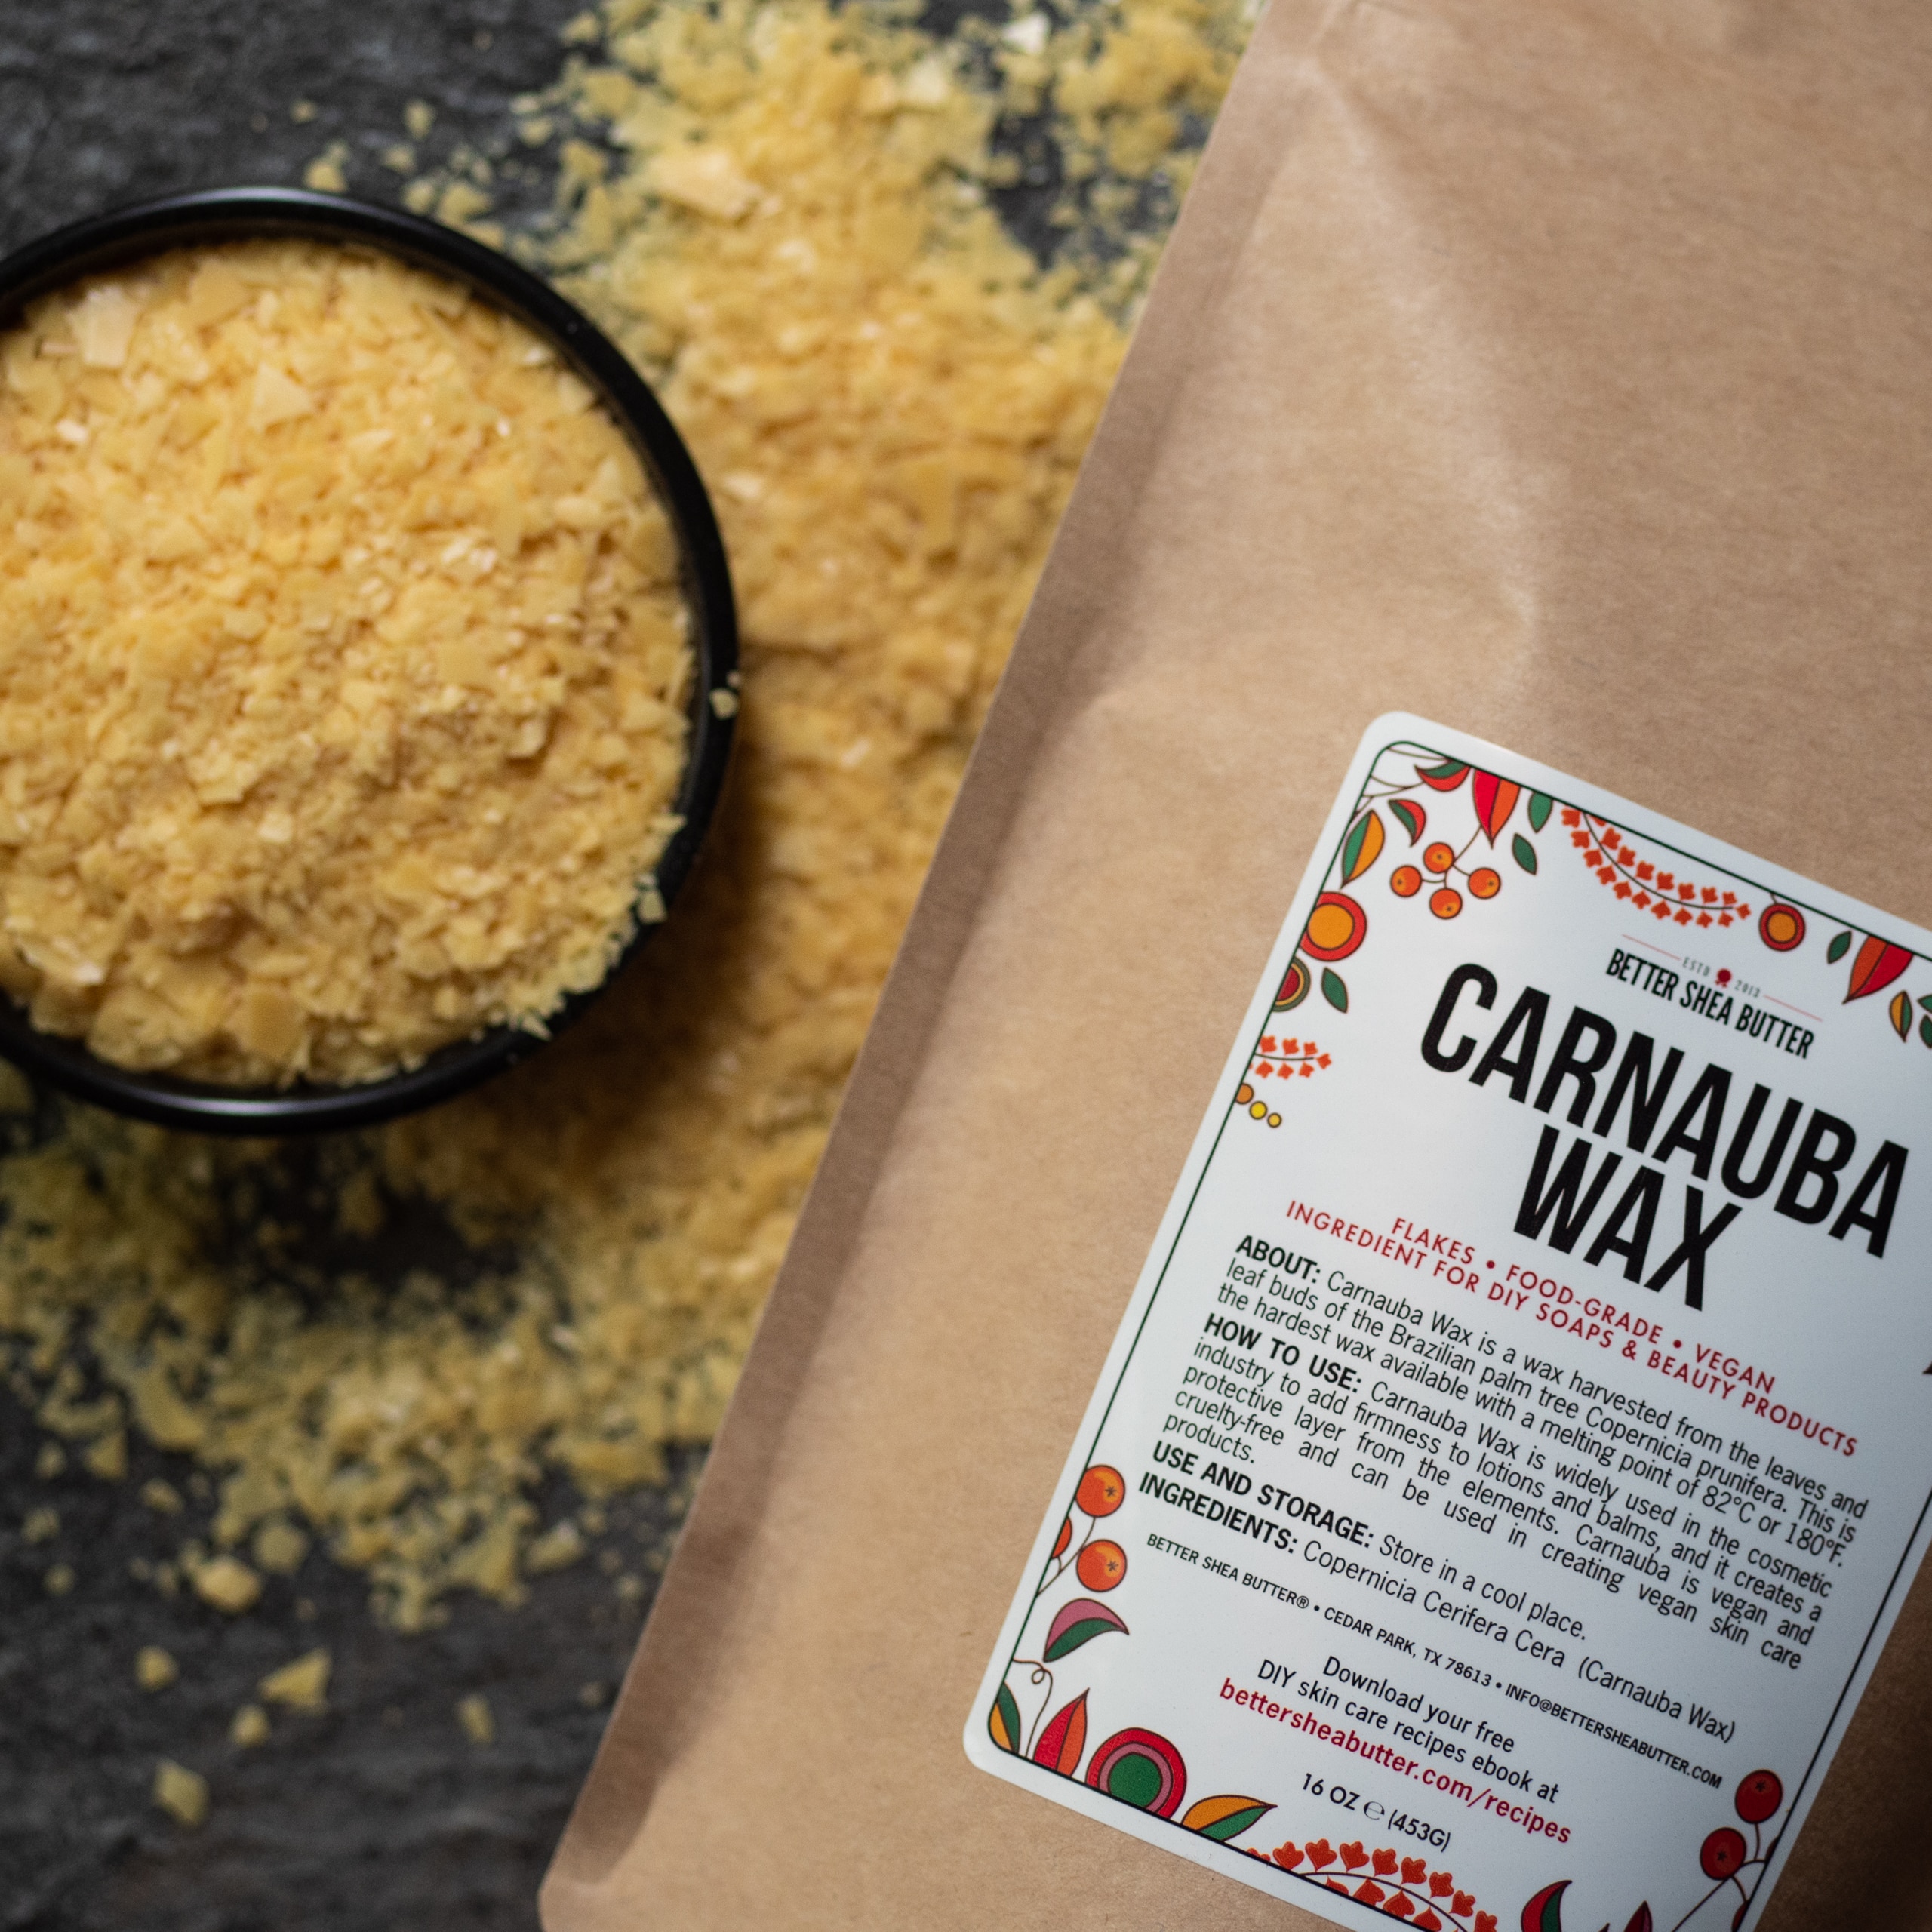 Carnauba Wax | For Wood, Furniture and Leather Finishing | Use in Homemade  Balms and Other Skin Care | 100% Pure Carnauba Wax Flakes | Food Grade 